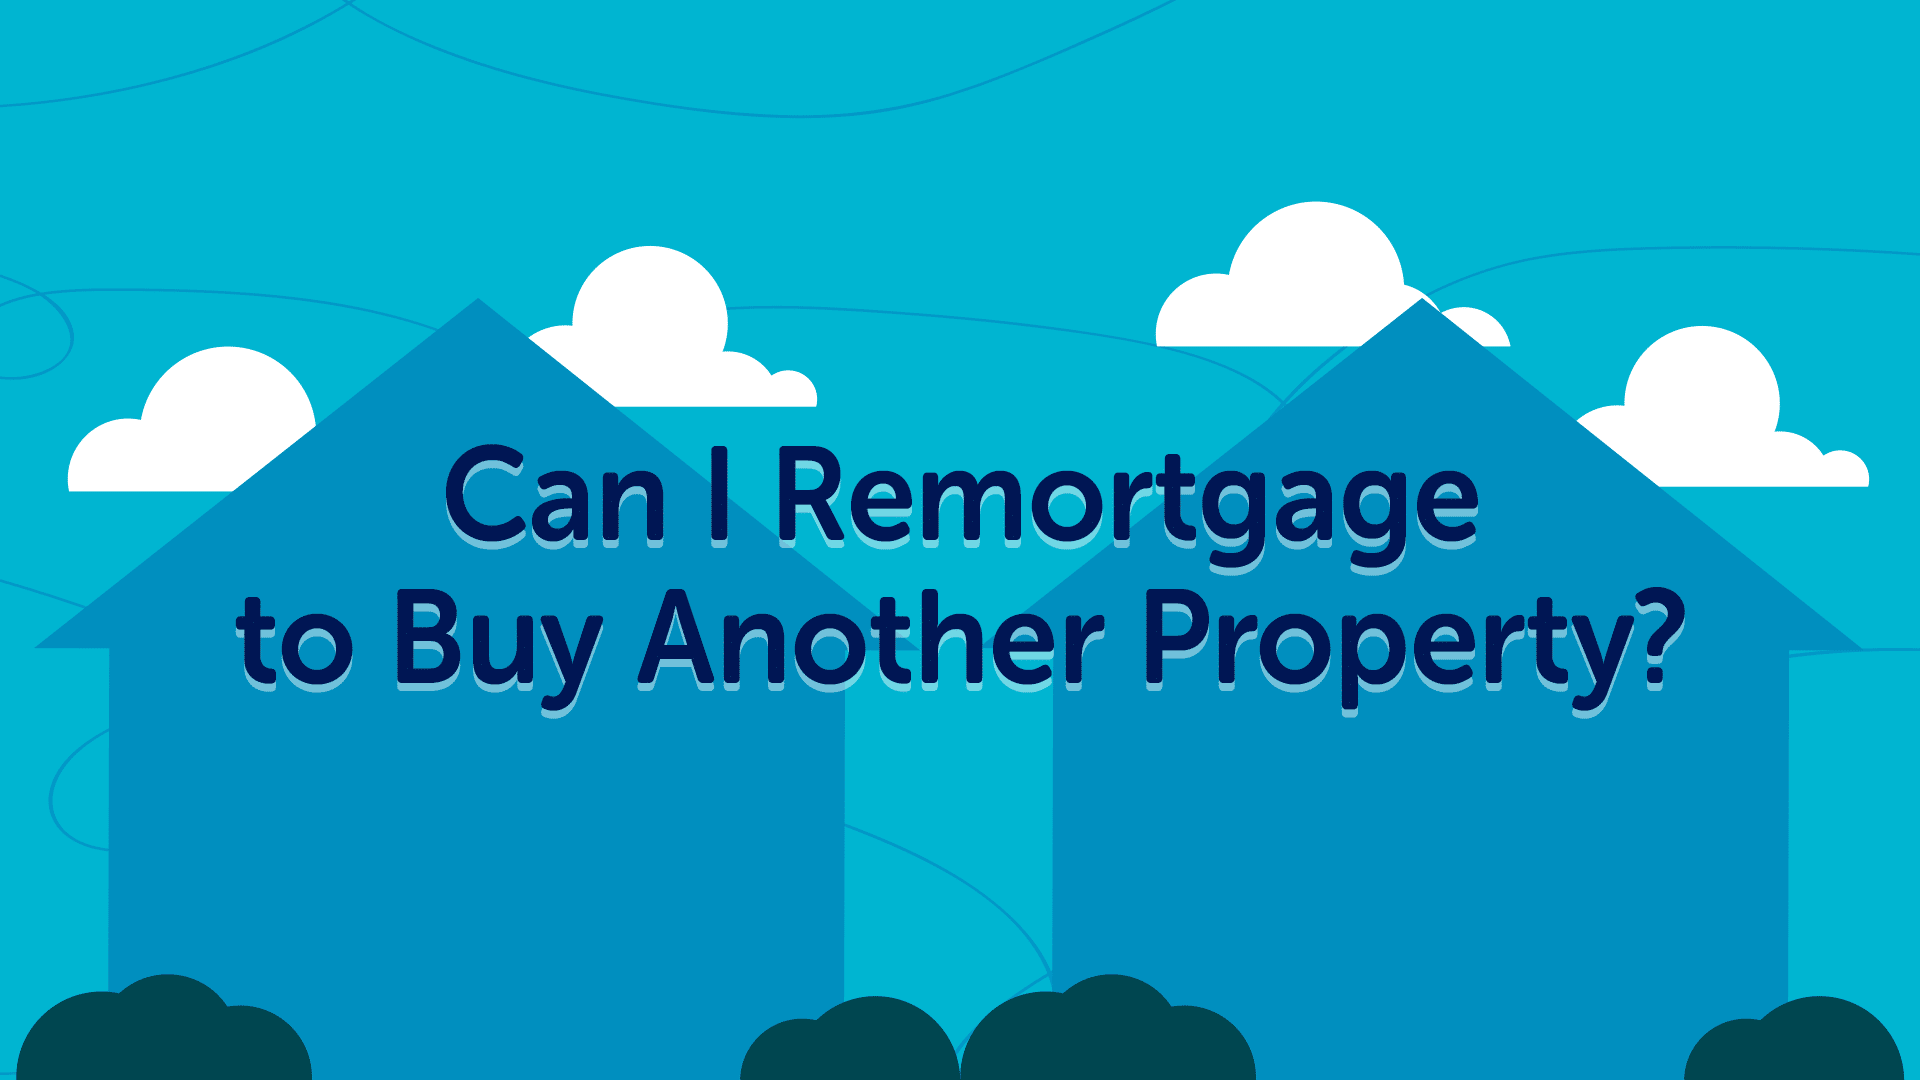 Can I Remortgage to Buy Another Property